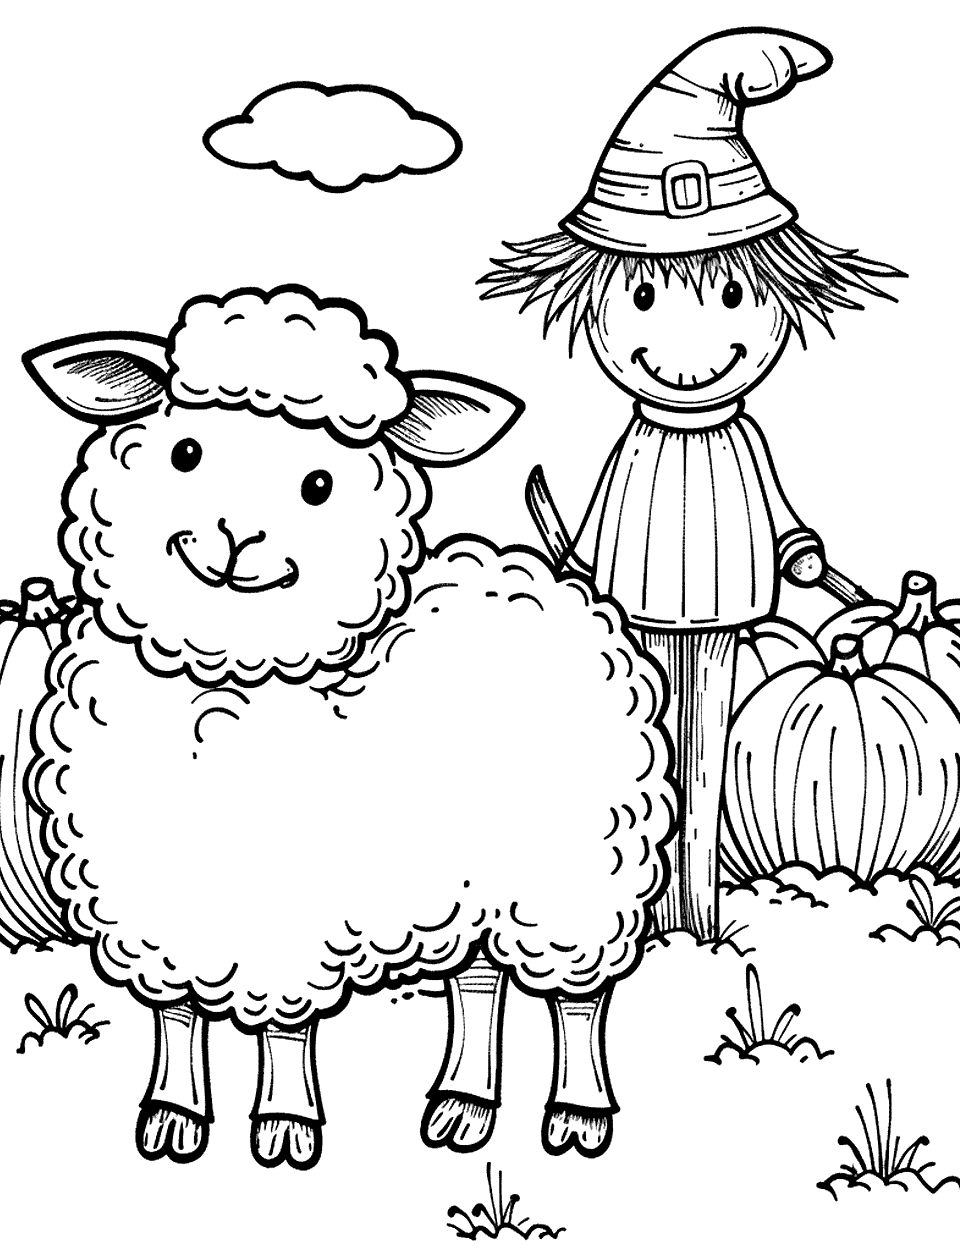 Sheep and a Scarecrow Coloring Page - A sheep standing next to a friendly scarecrow in a pumpkin patch.